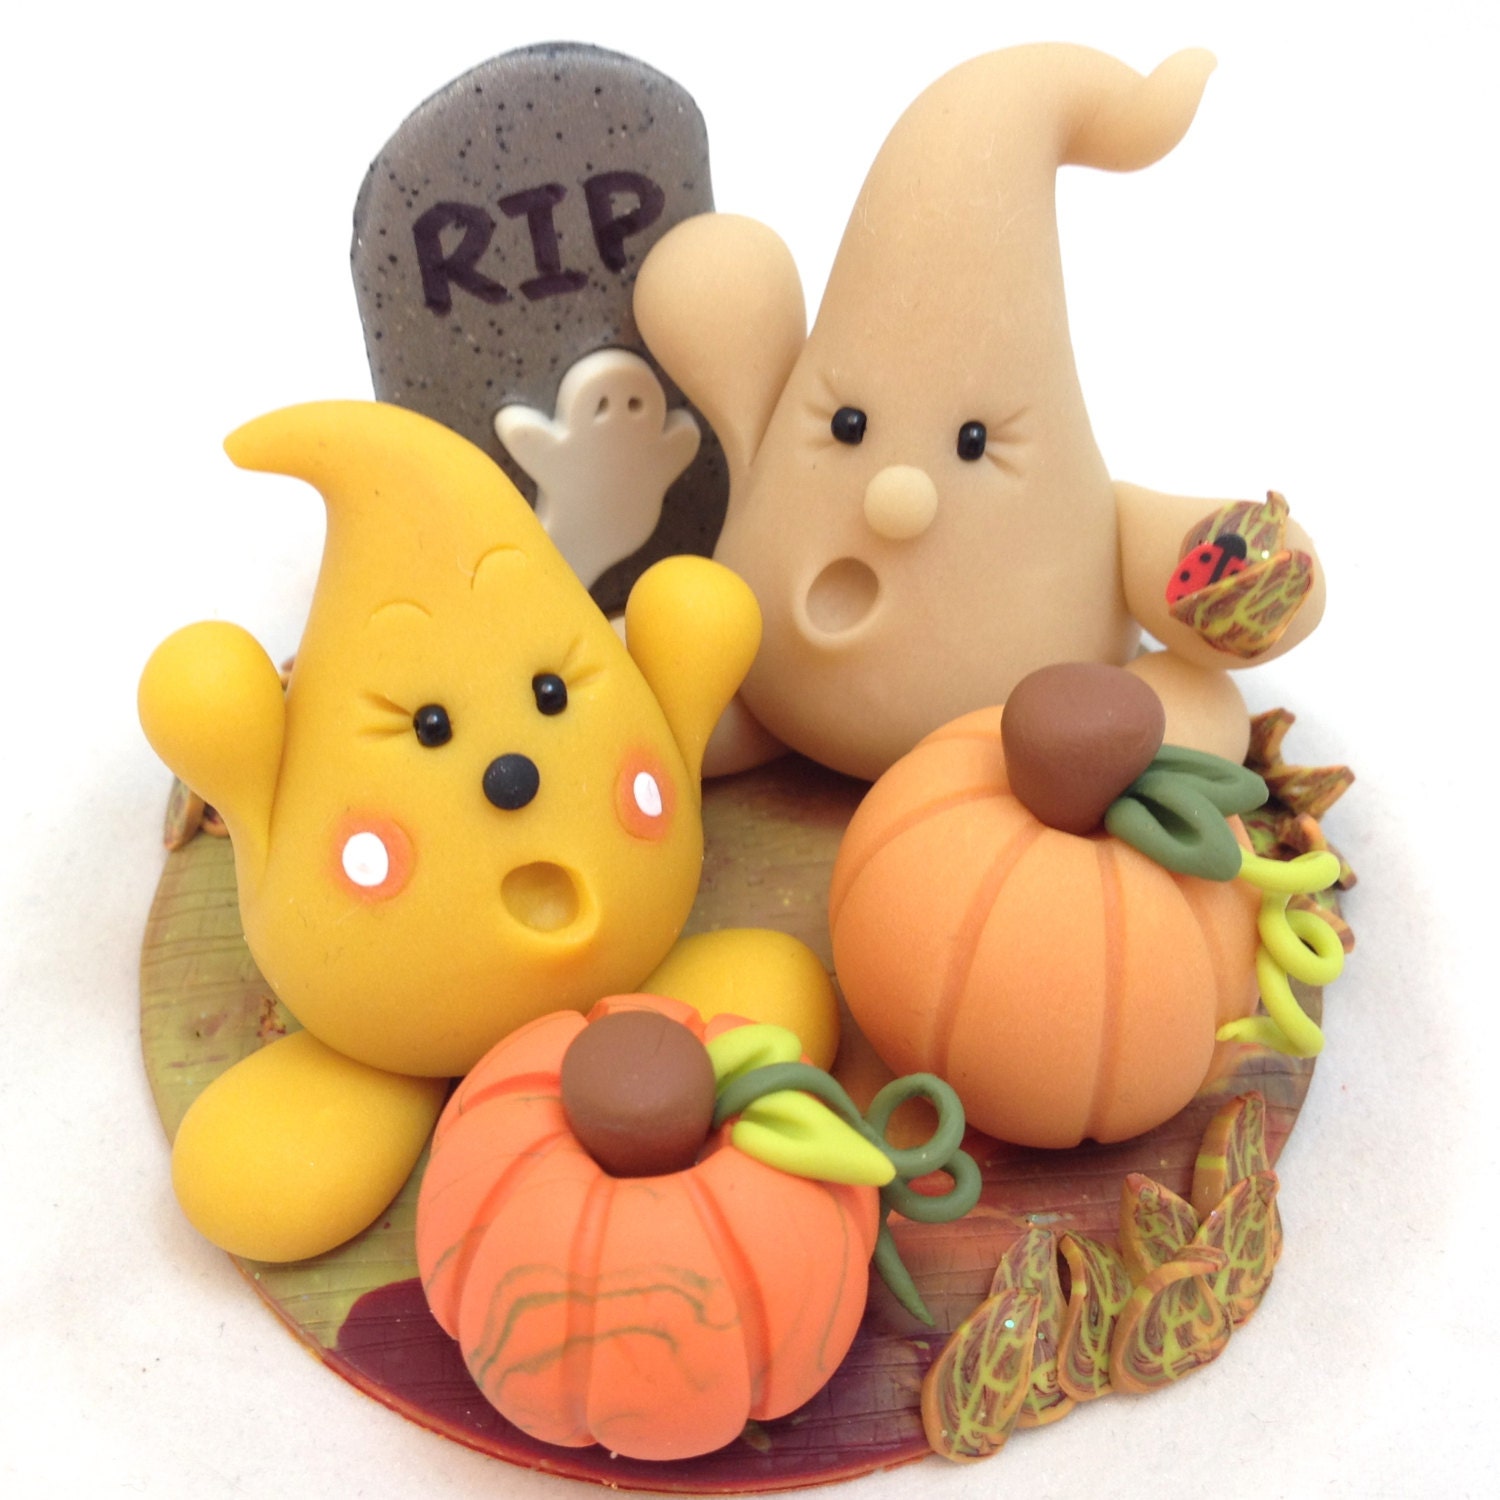 Halloween Ghost Figurine: Parker's Big Scare - Polymer Clay StoryBook Scene Sculpture with Pumpkins & Ghost - KatersAcres